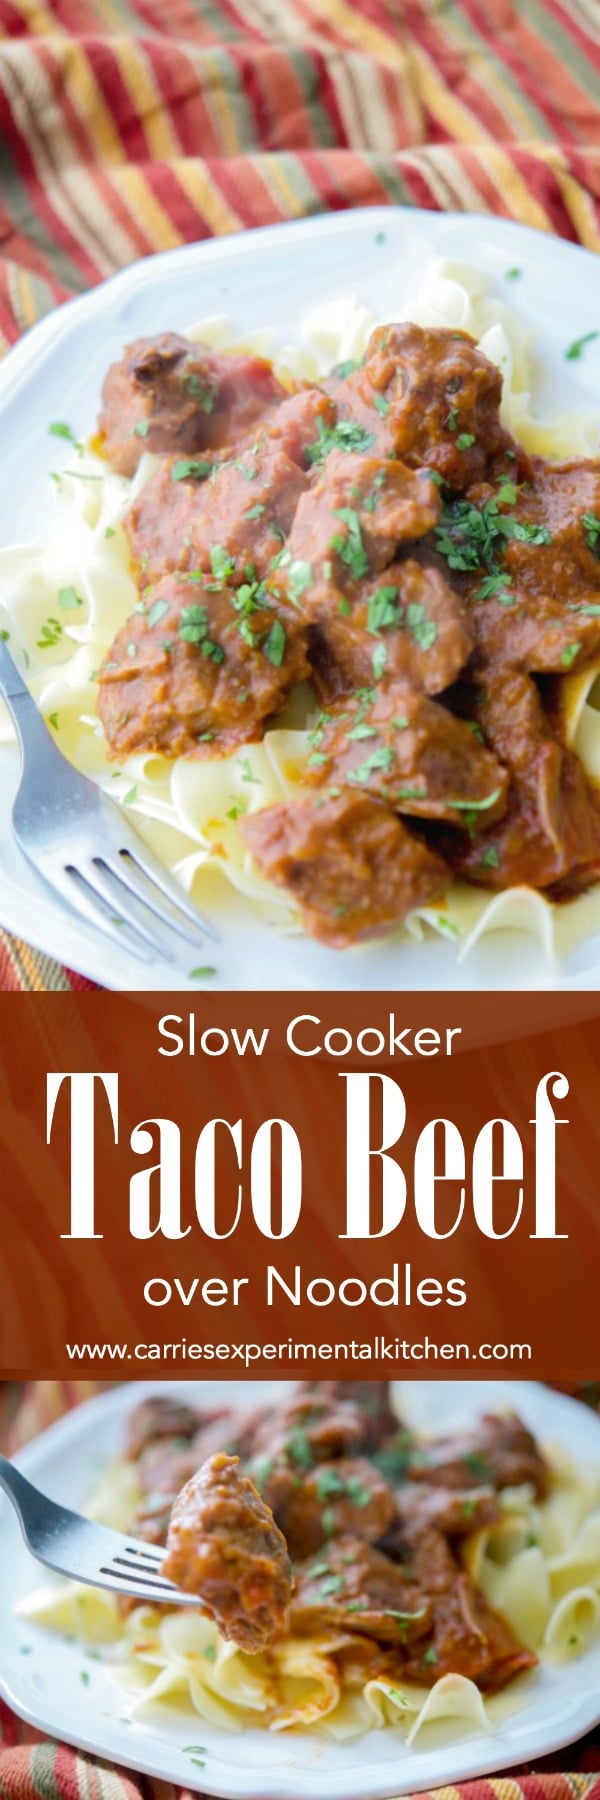 A plate of slow cooker taco beef with a fork